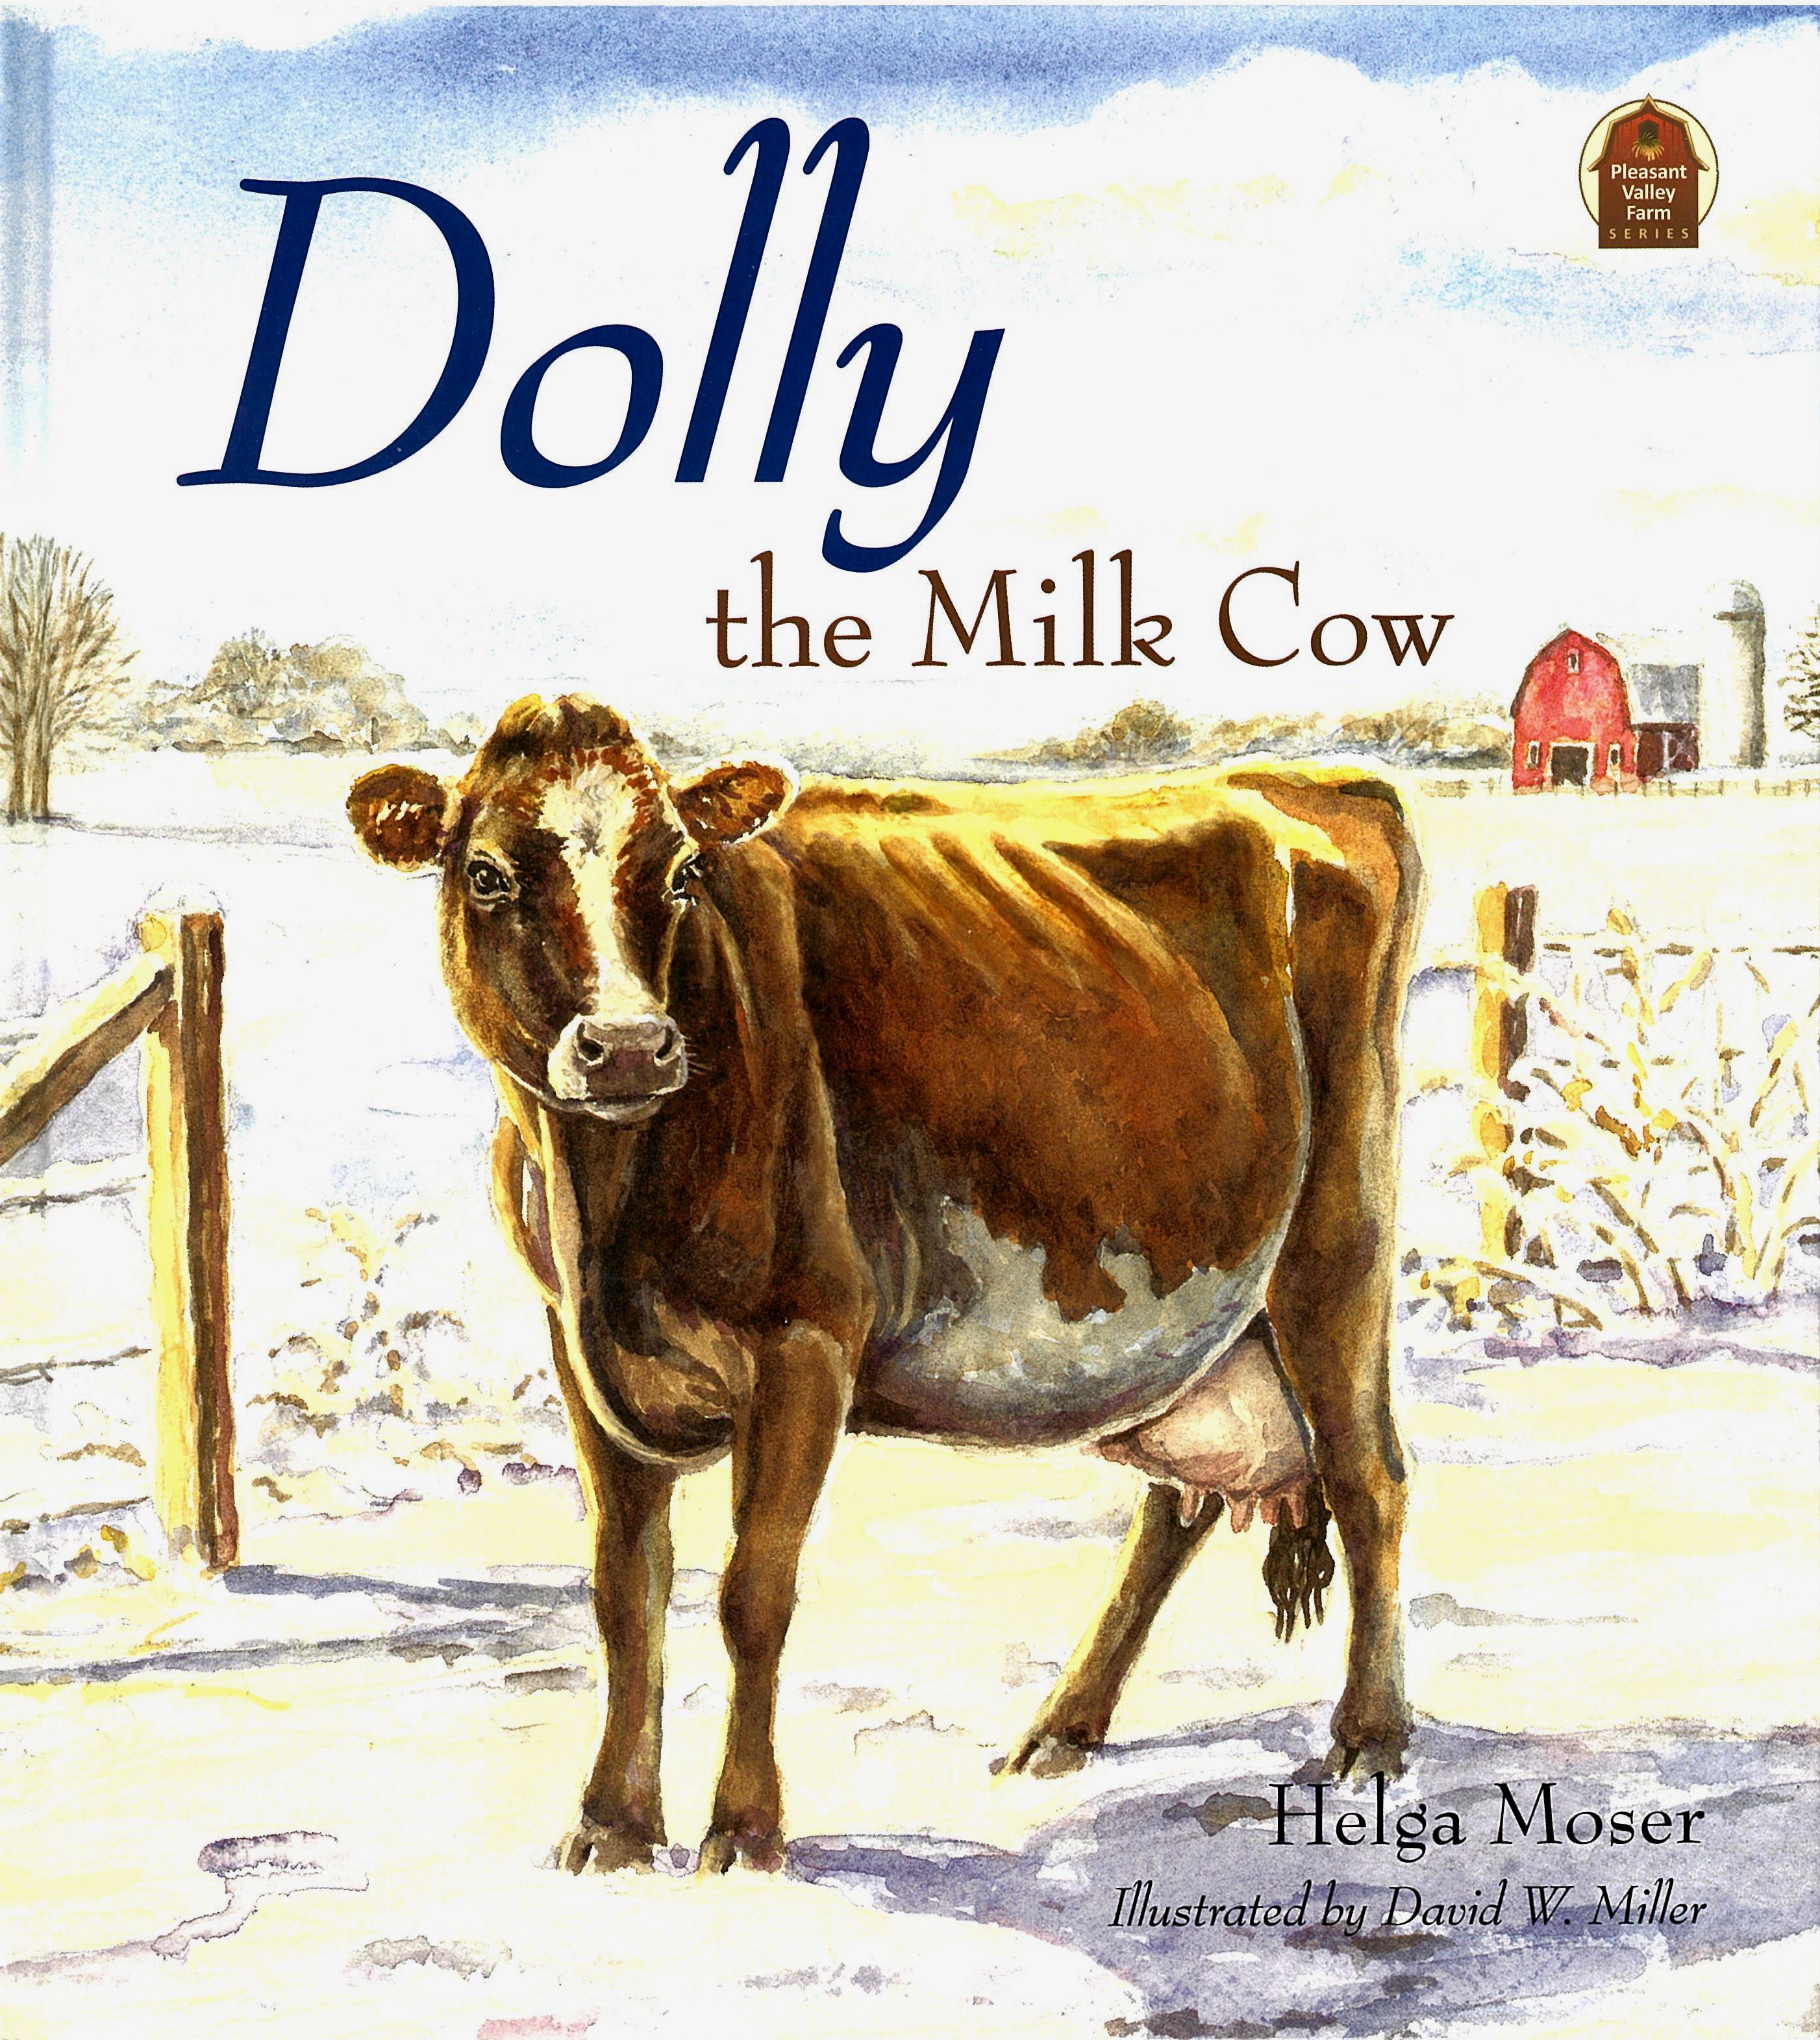 DOLLY THE MILK COW Helga Moser